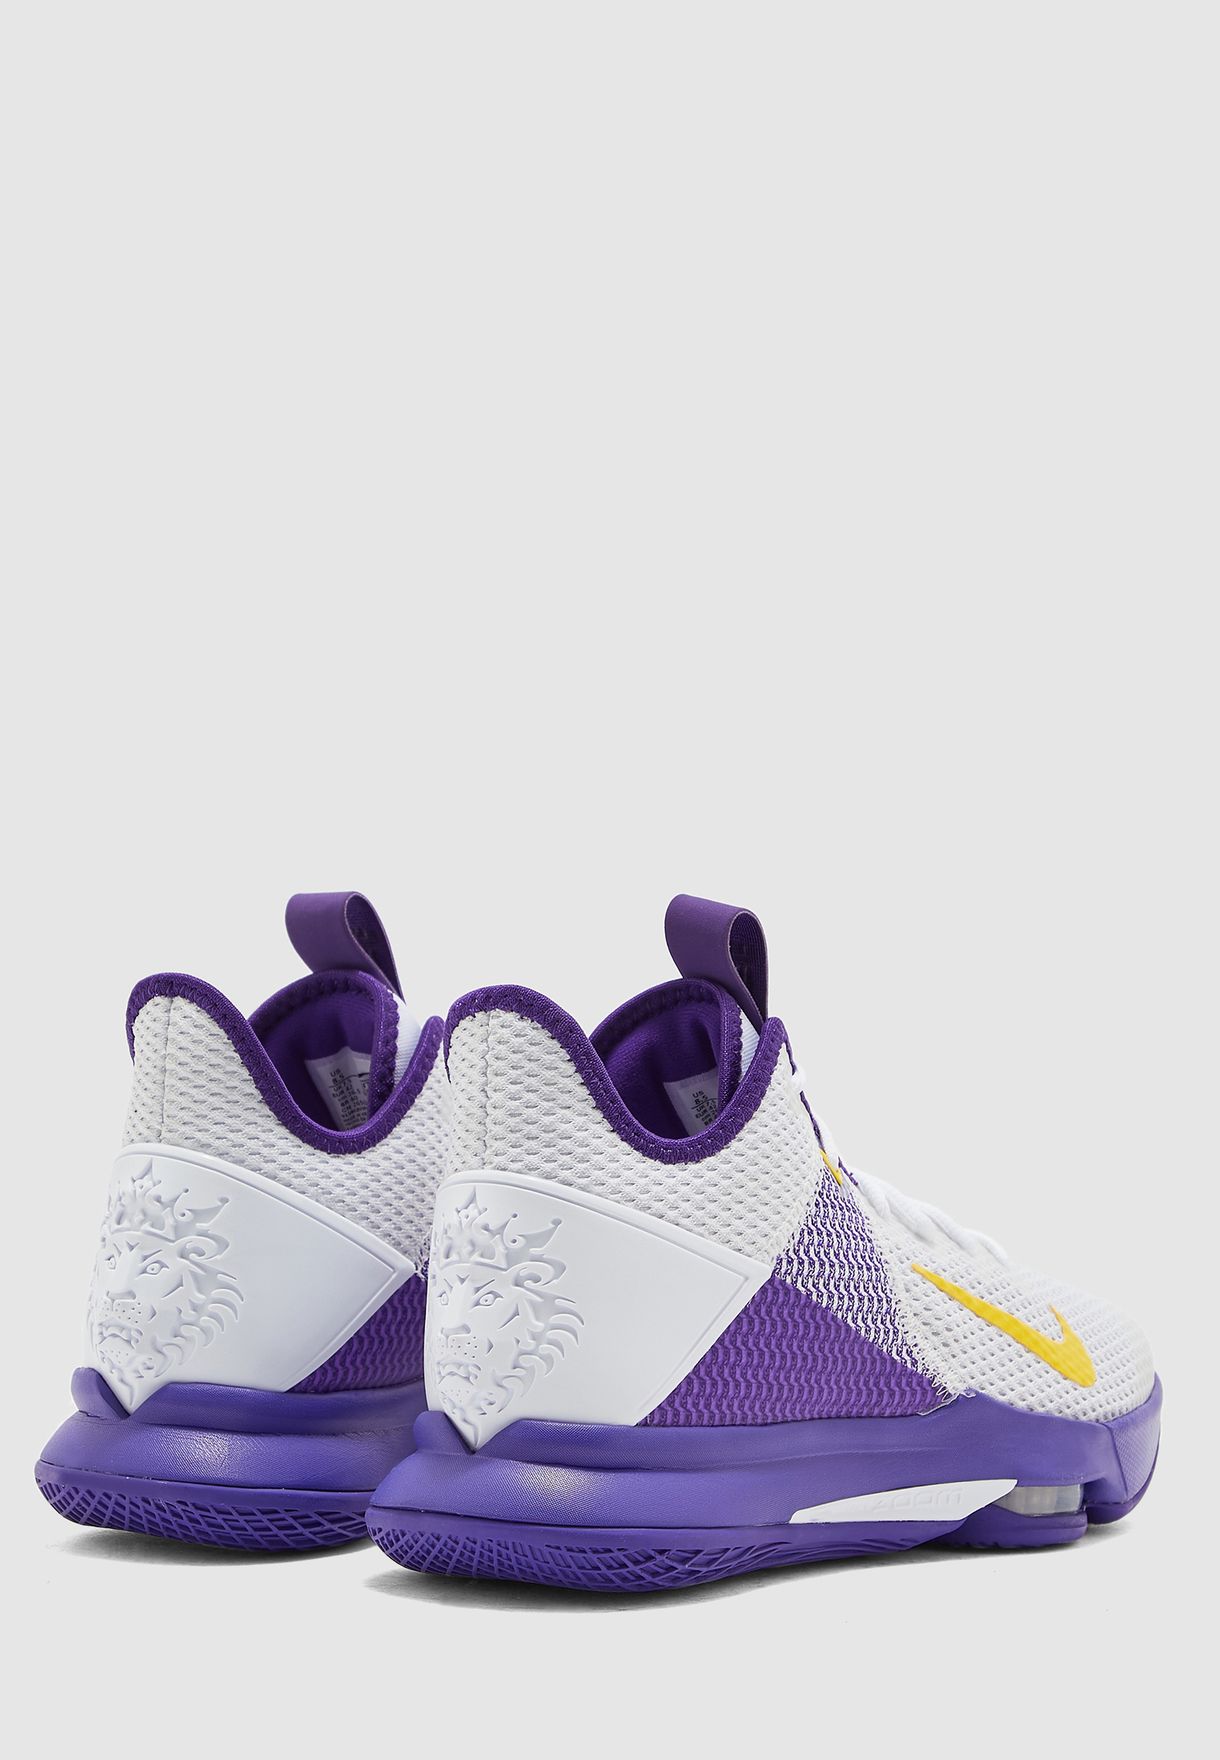 lebron shoes purple and white